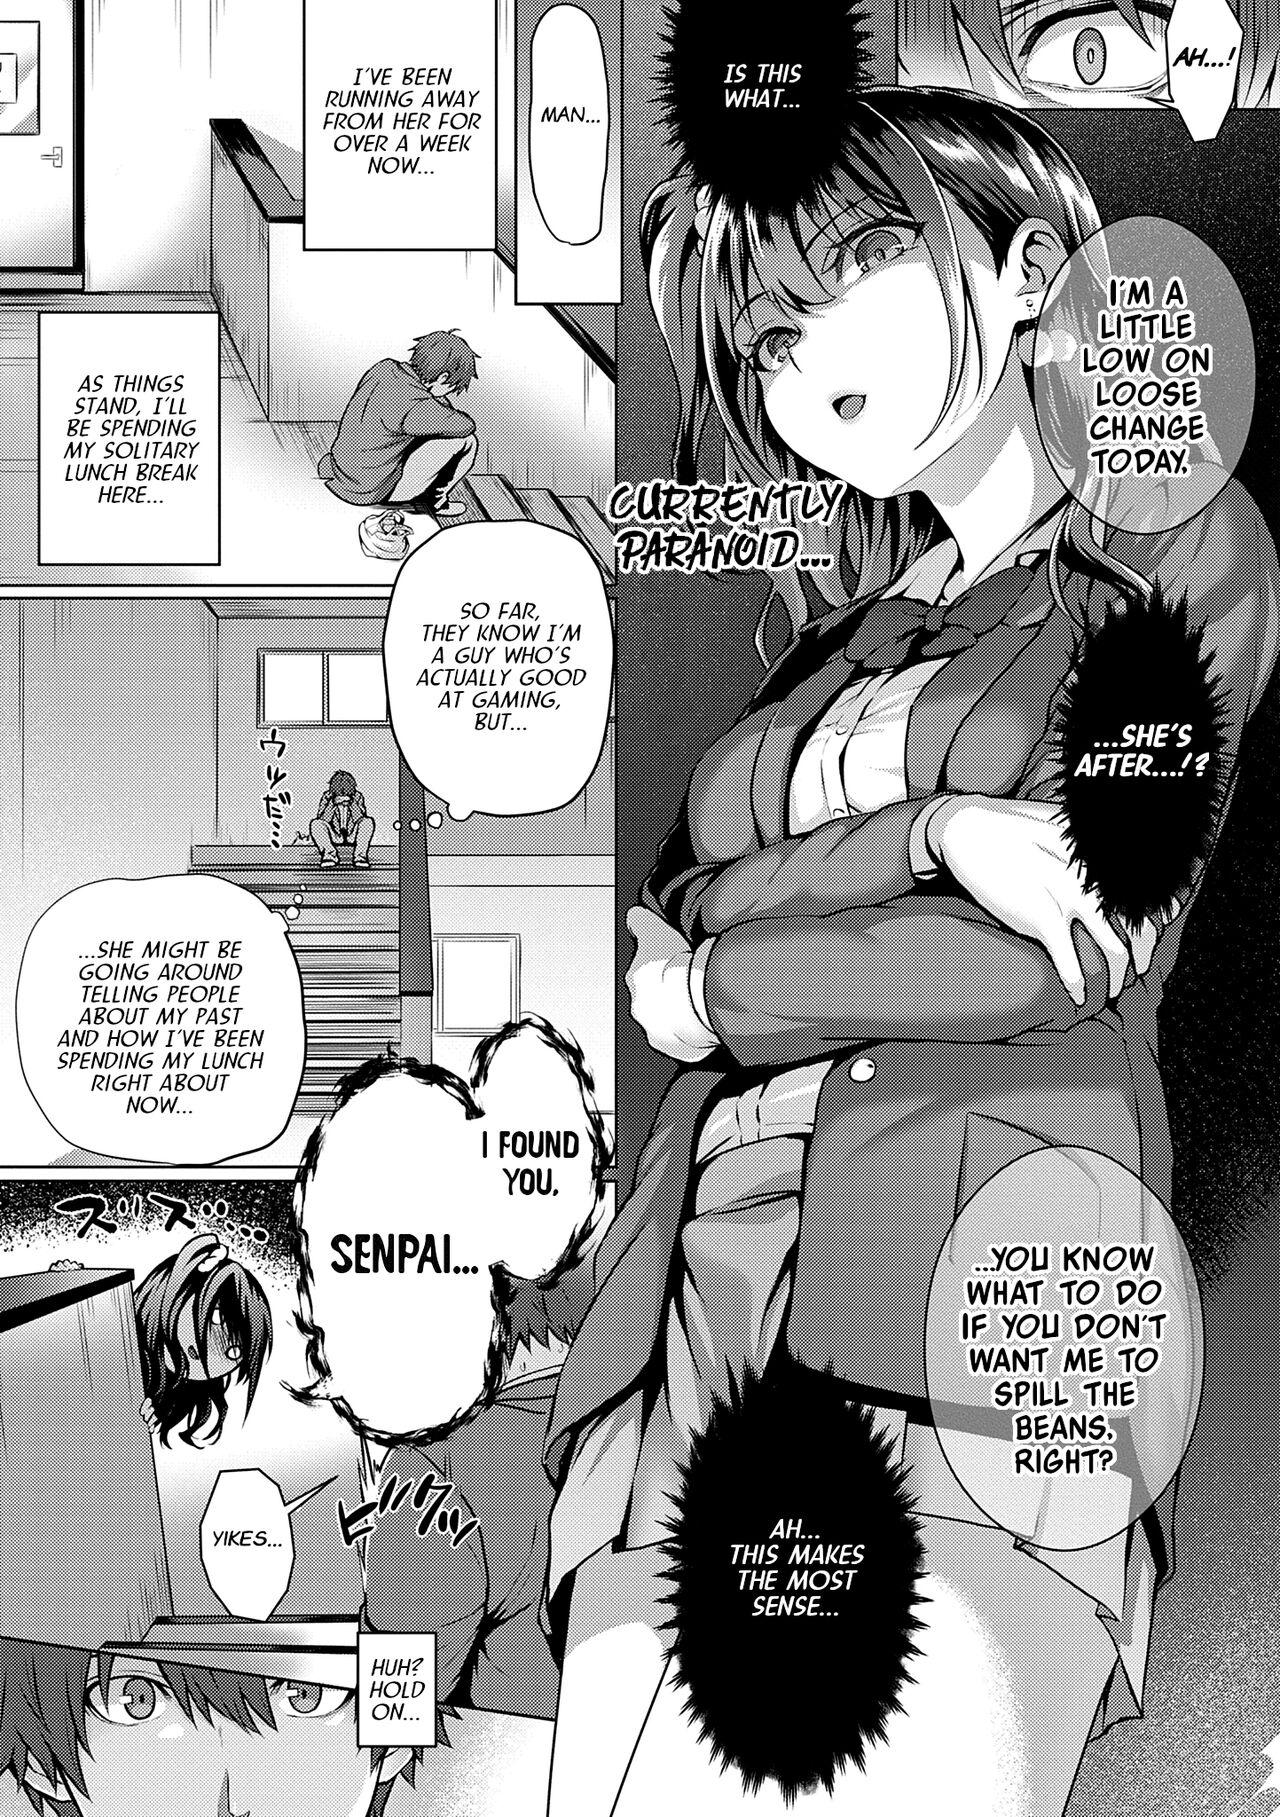 Fucking Pussy Flag Kaishuu wa Totsuzen ni | The Puzzle Pieces Are Suddenly Coming Together Morrita - Page 5